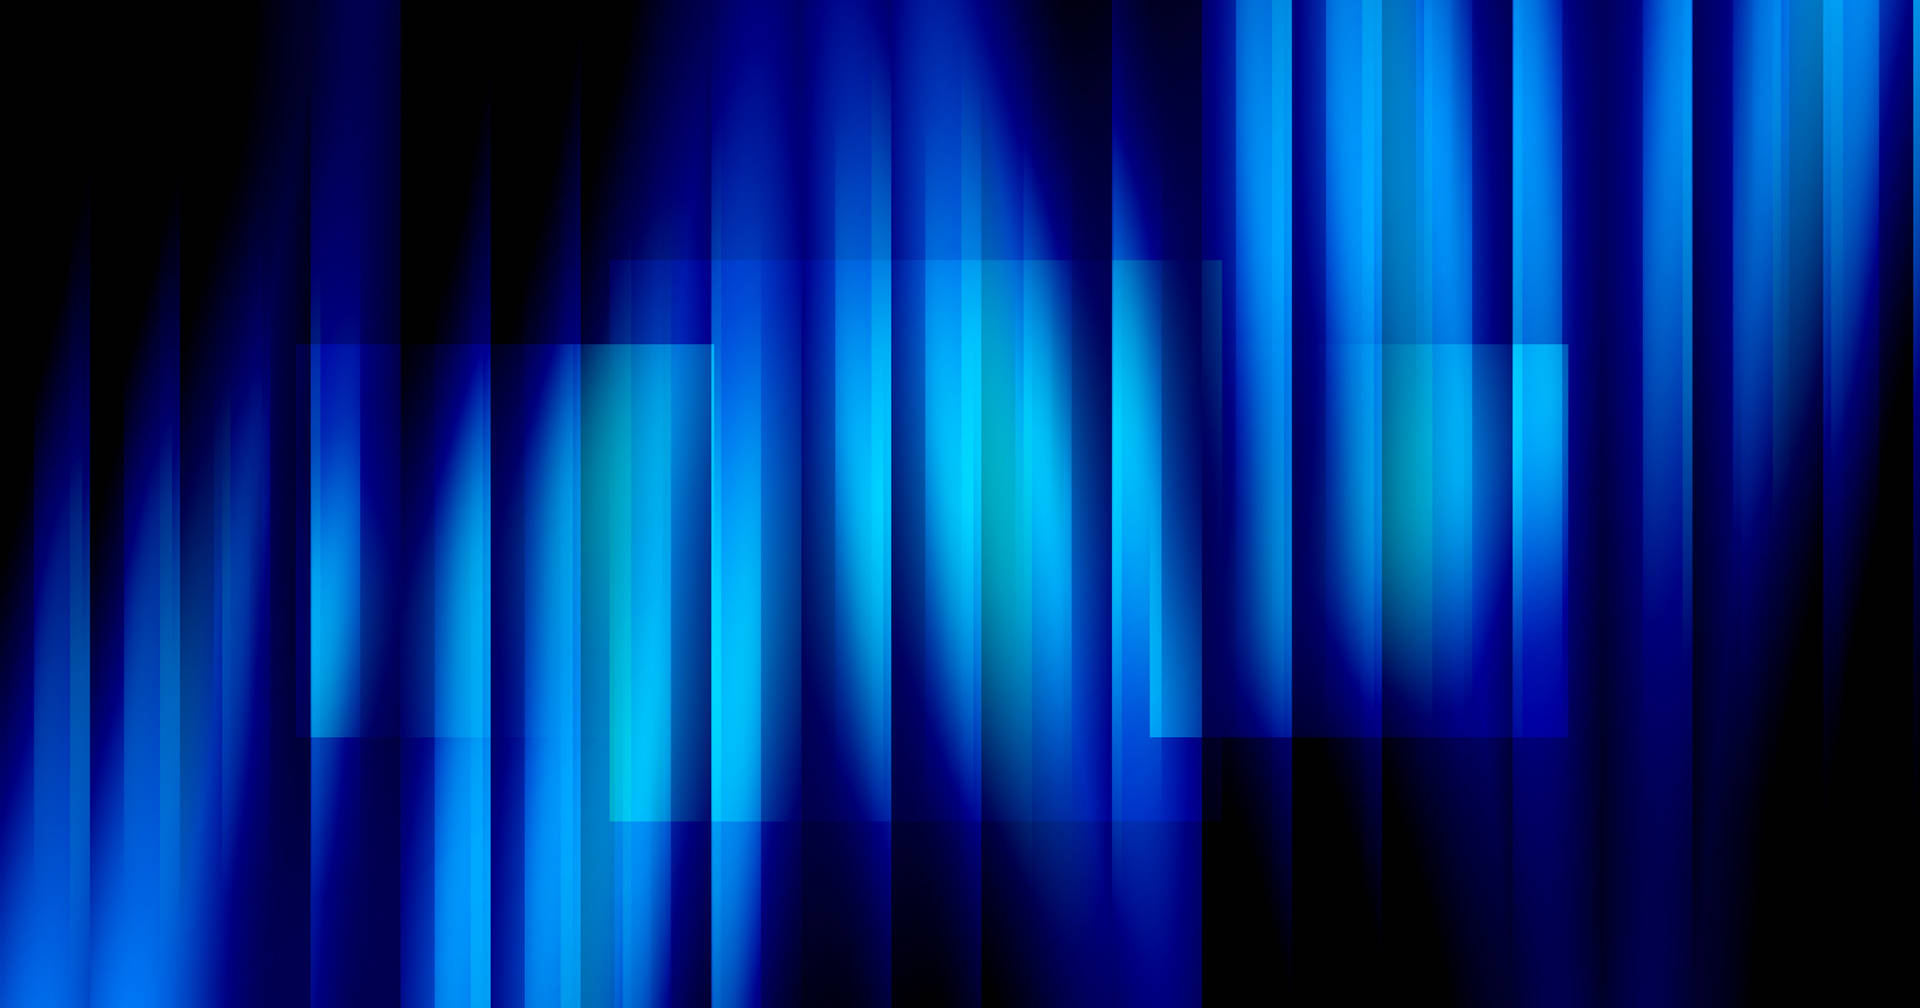 Dark Blue Aesthetic Vertical Strips Picture